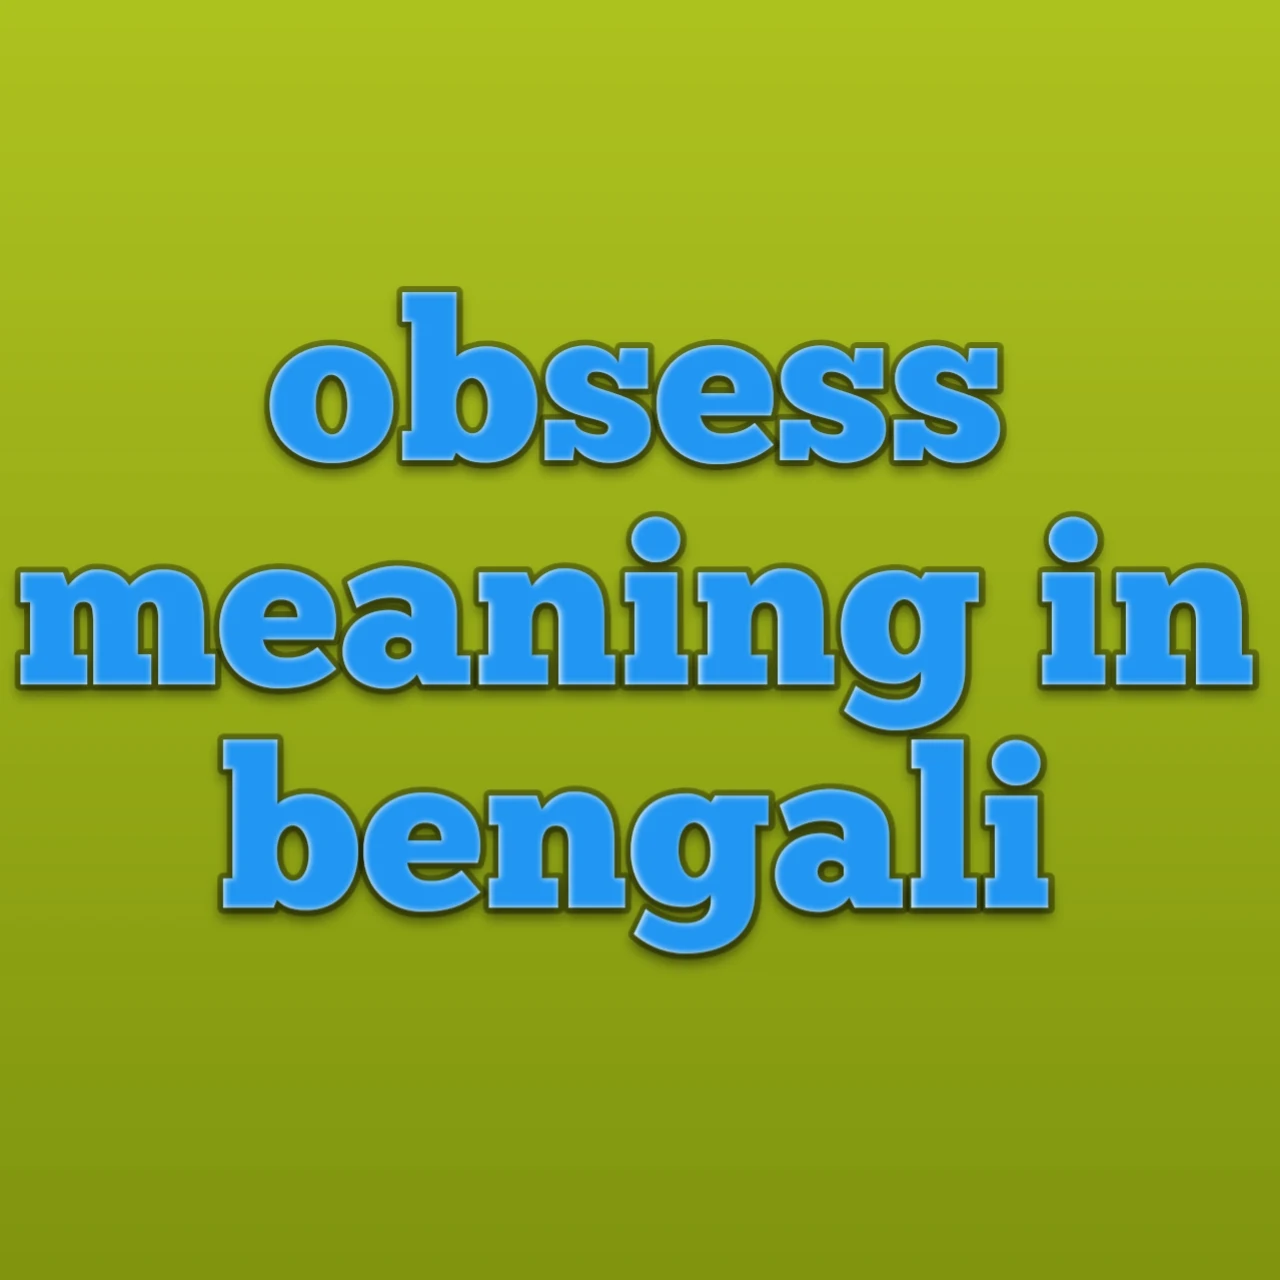 obsess meaning in bengali, obsess meaning, obsess definition, synonyms of obsession